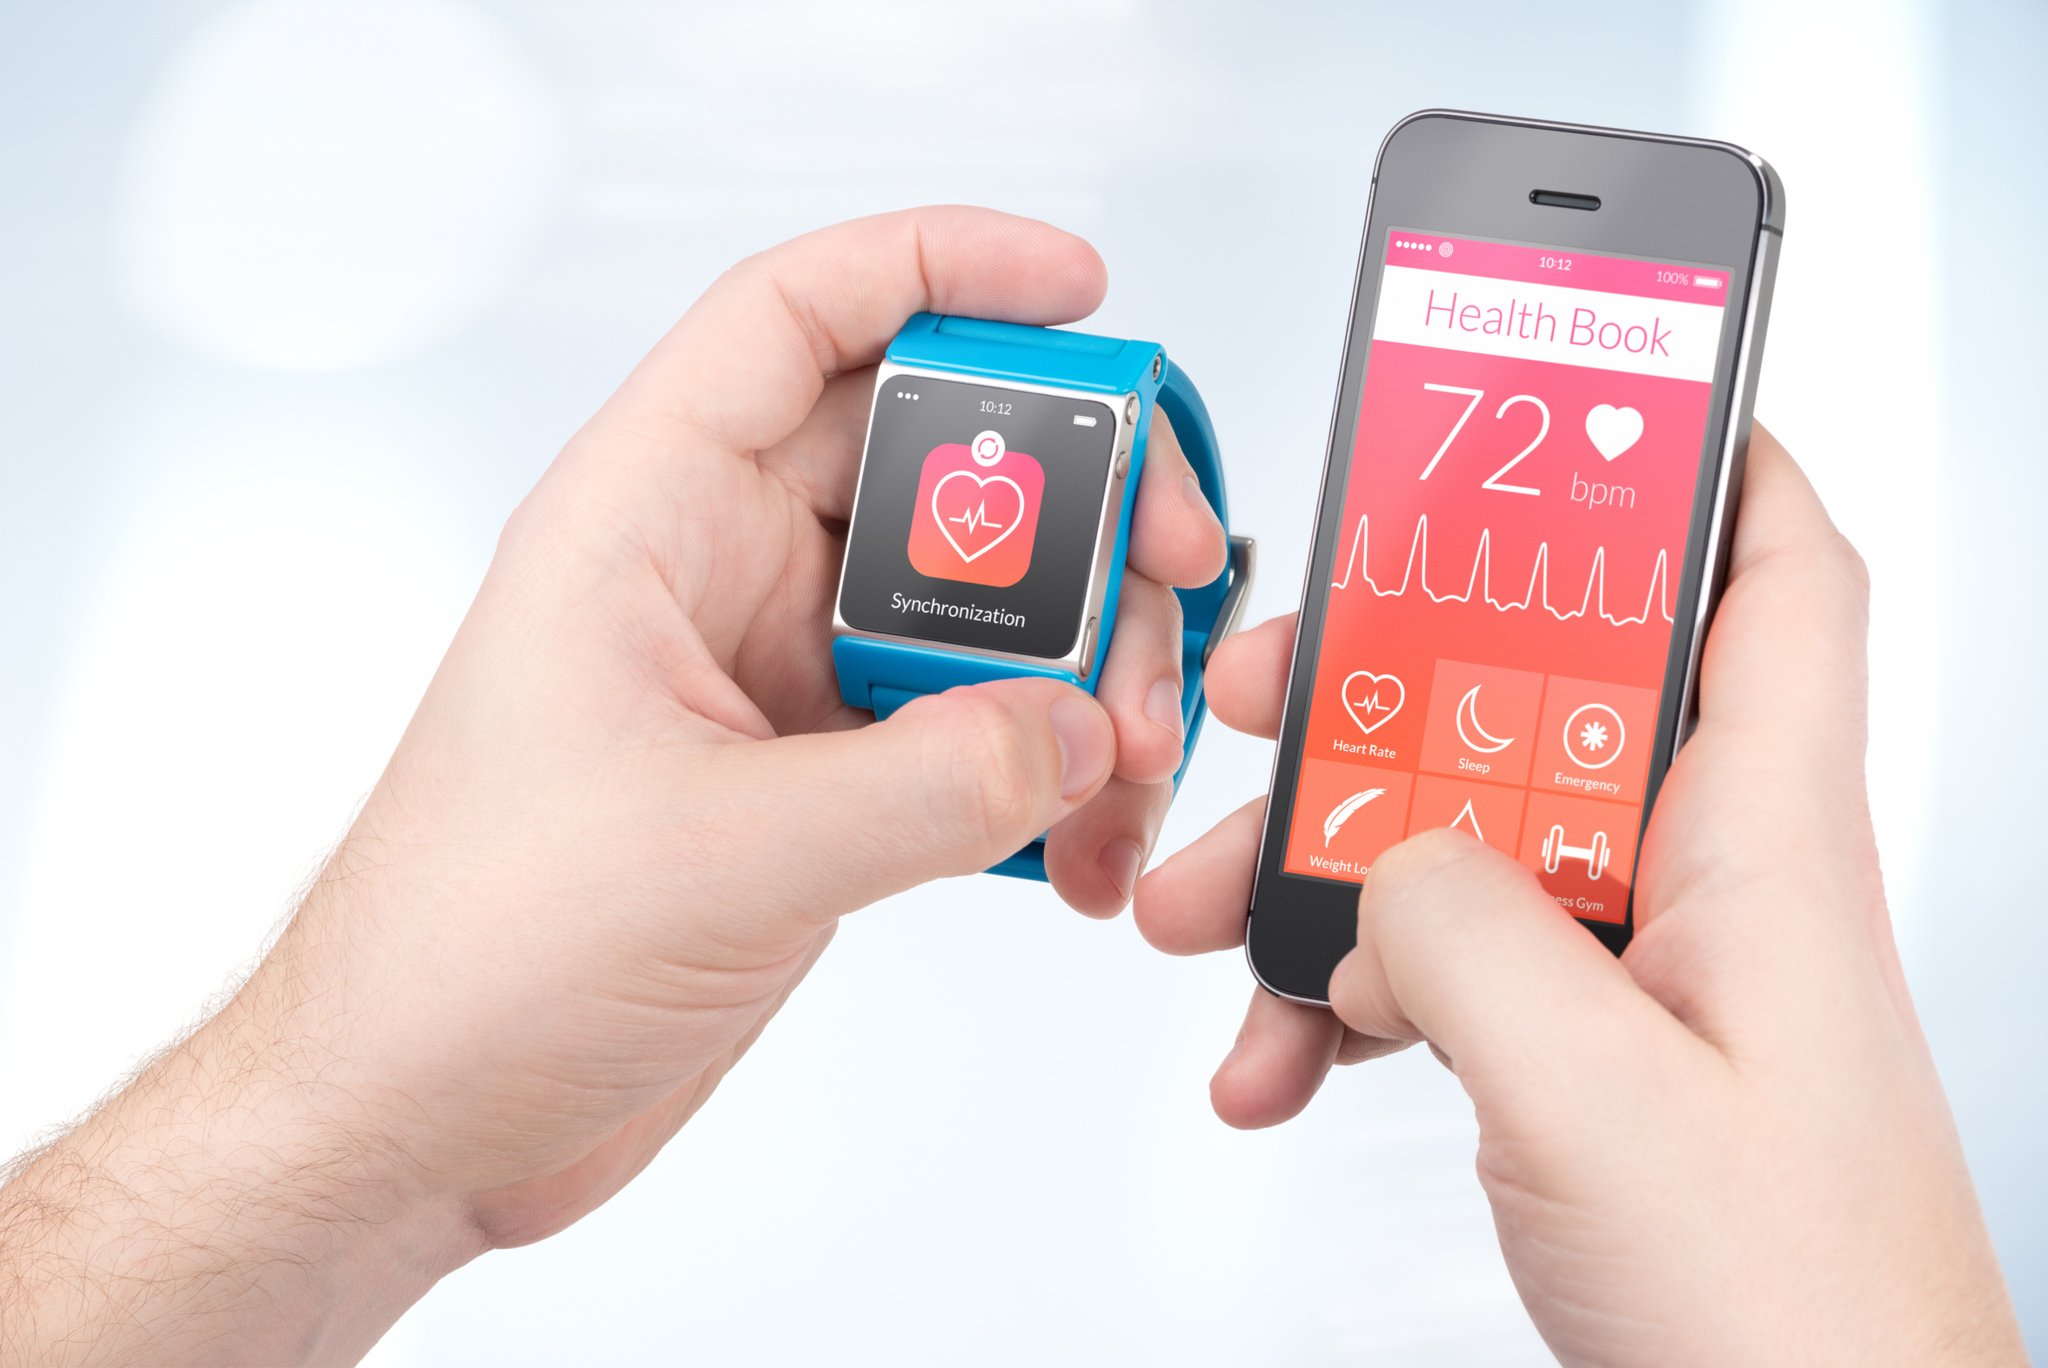 The left hands holds a smartwatch, the right a smartphone.